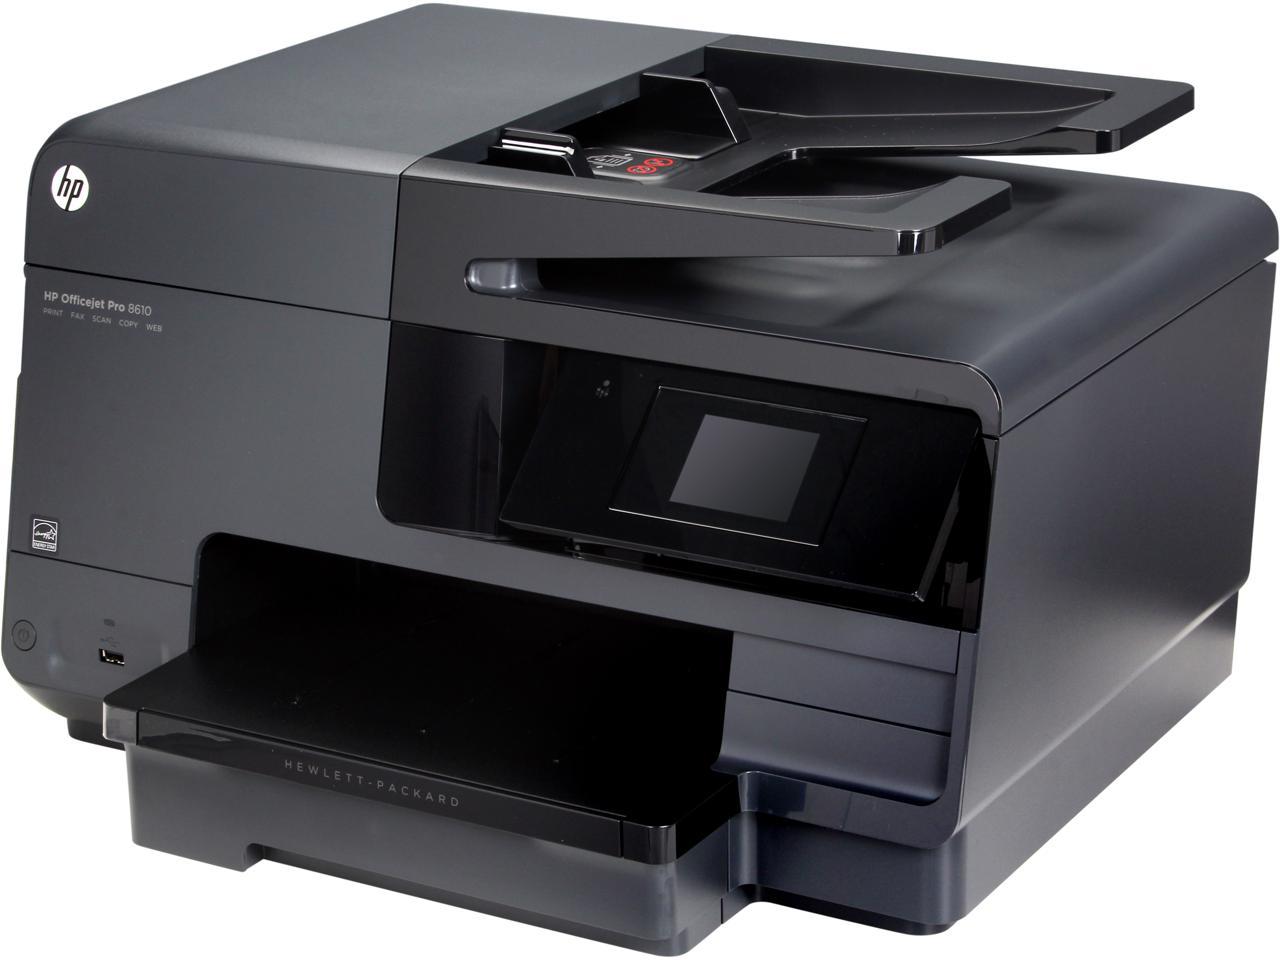 cannot find a driver for mac for my hp officejet pro 8610